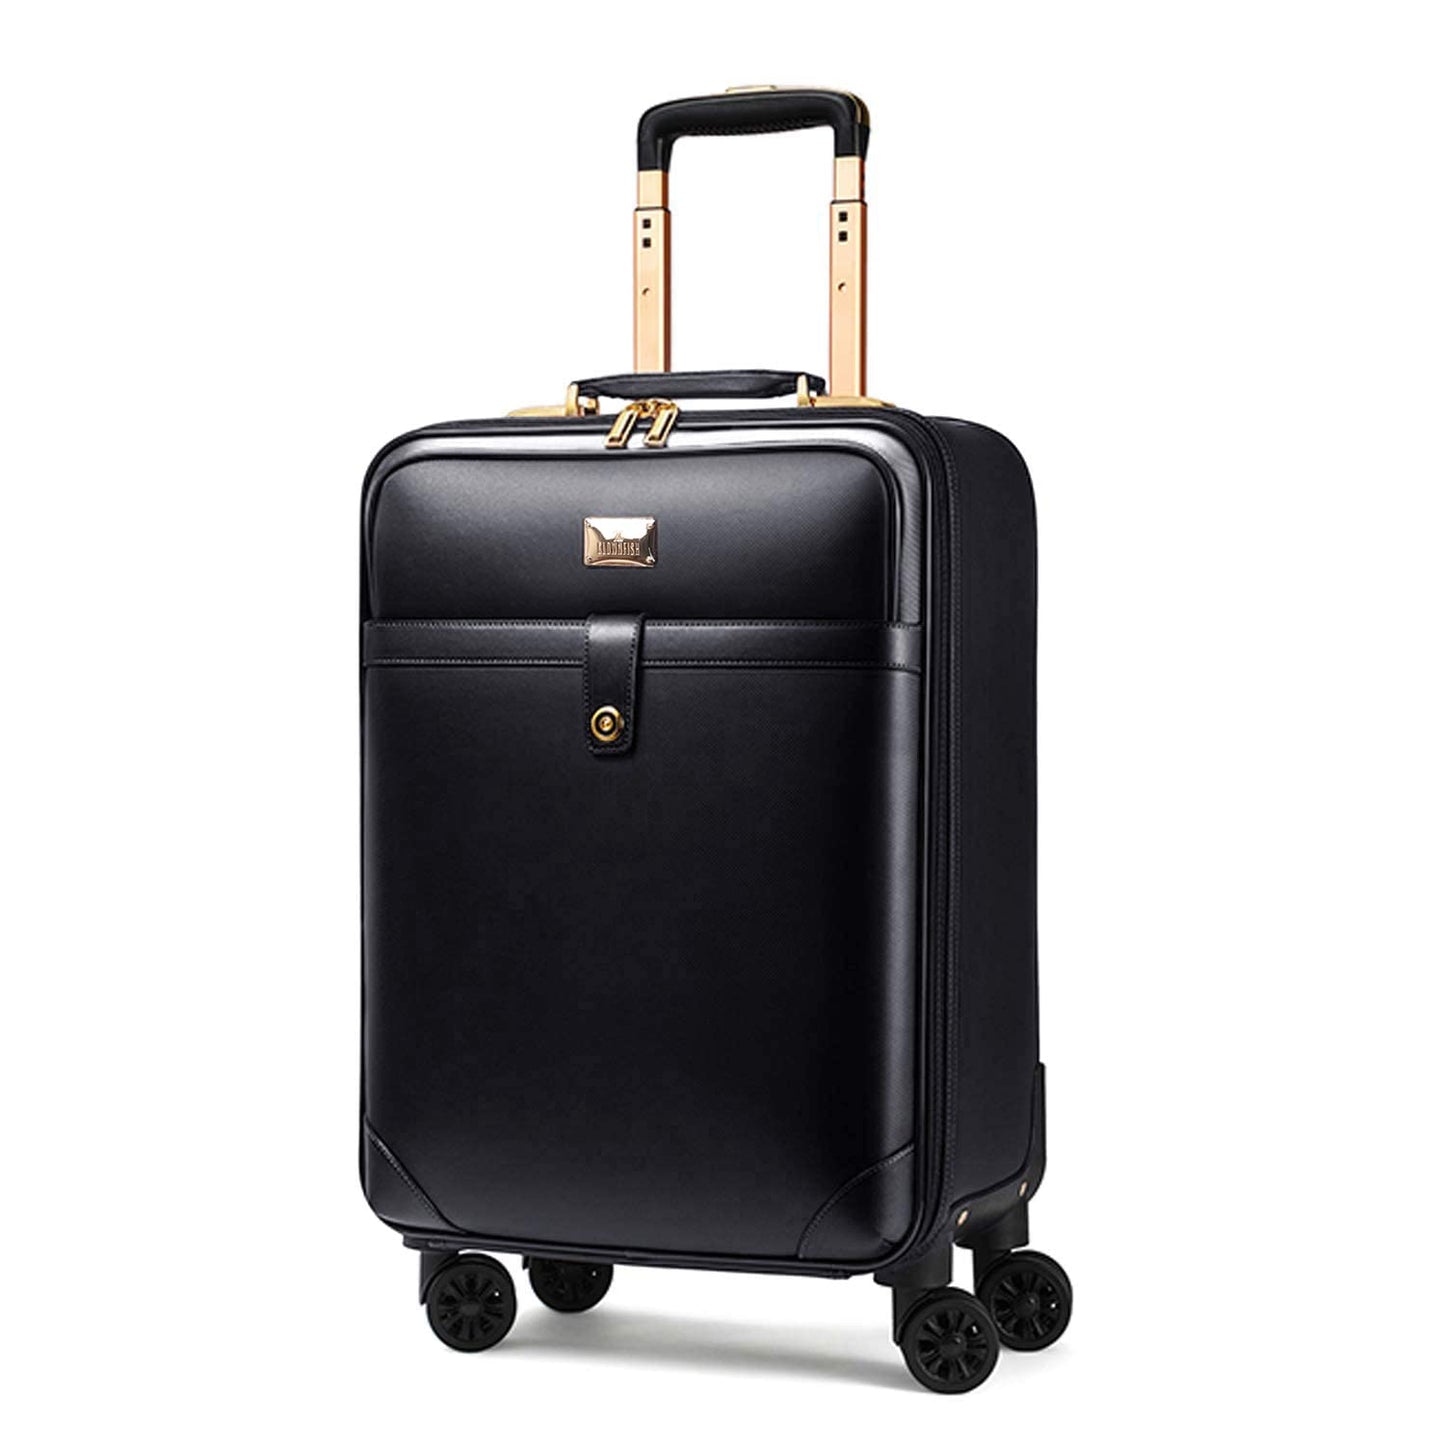 THE CLOWNFISH Luxury Luggage Faux Leather Hardsided Suitcase Spinner 8 Wheel Trolley Bag Travel Laptop Roller Case (Black), H-56 Centimeters